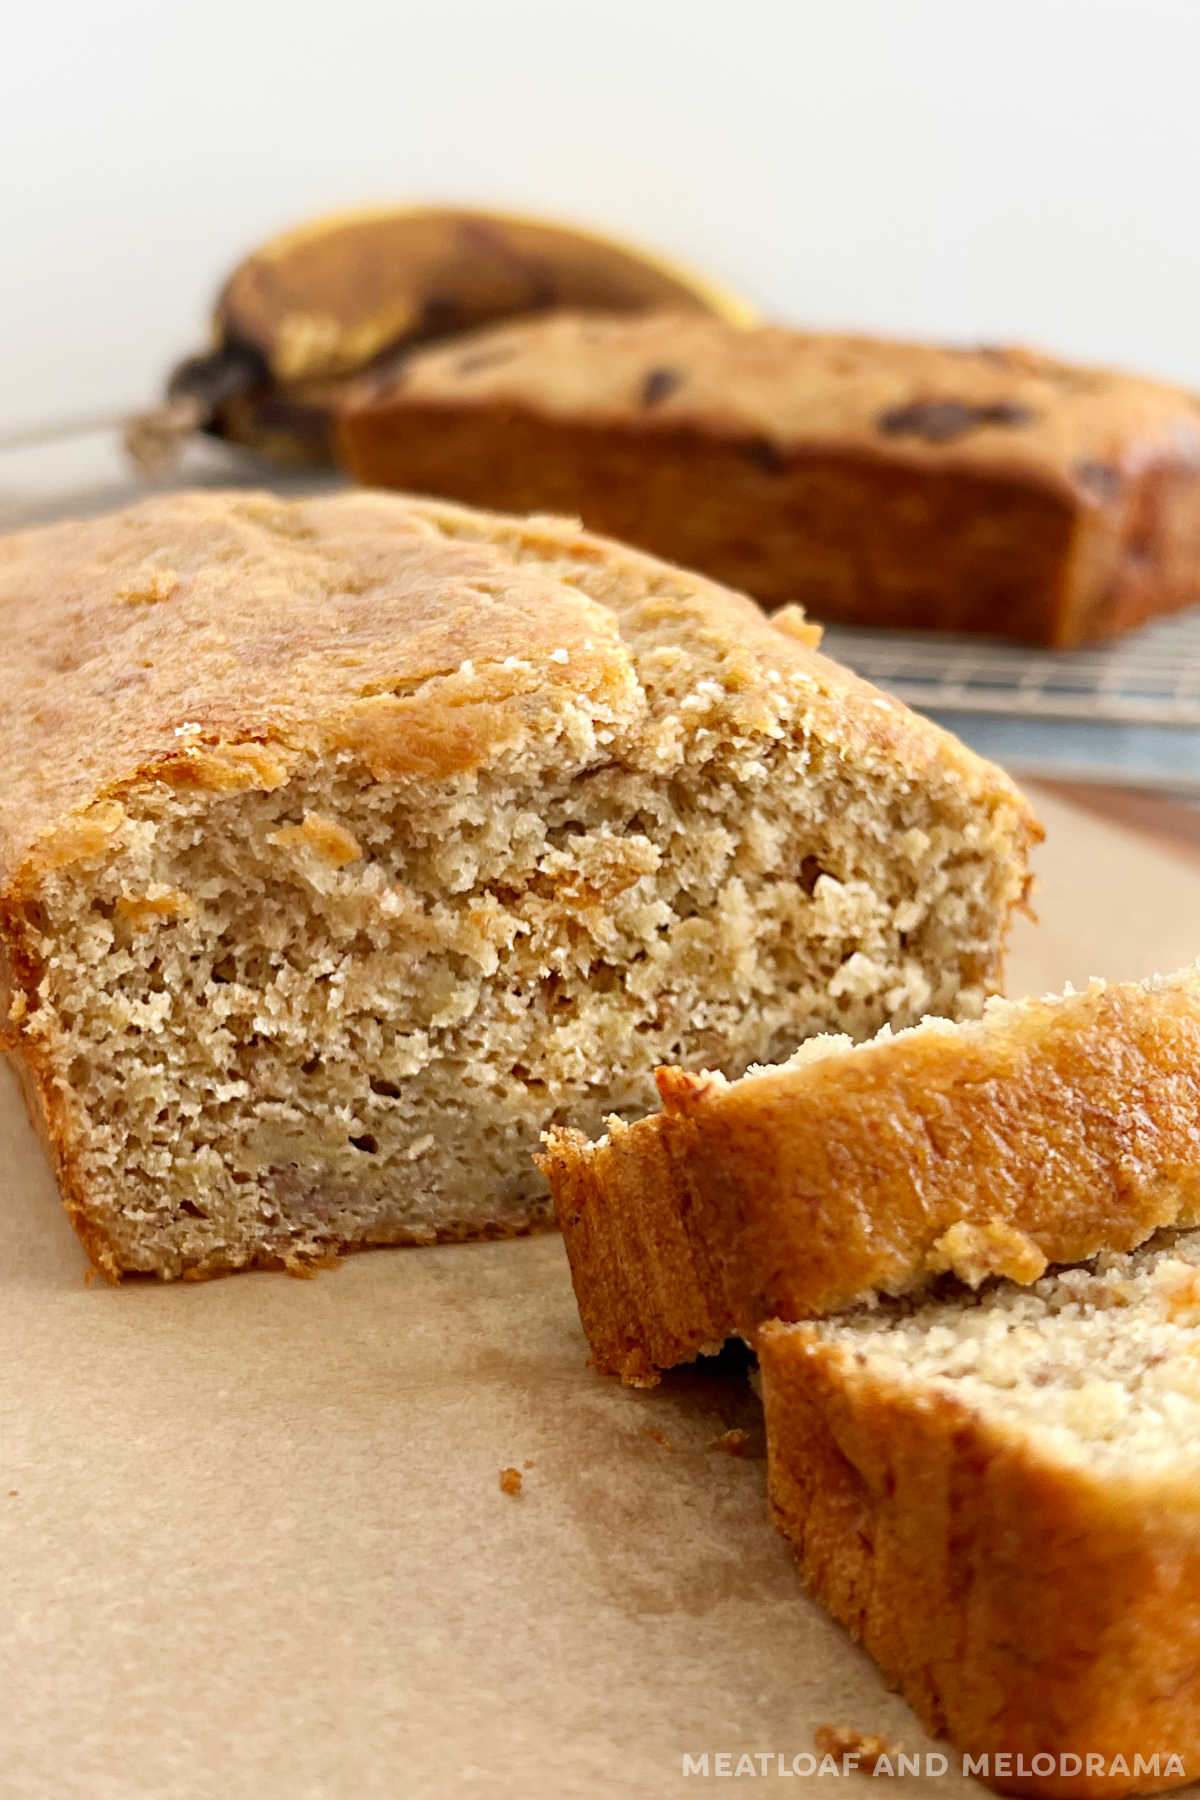 How Common Baking Mistakes Change a Banana-Bread Loaf